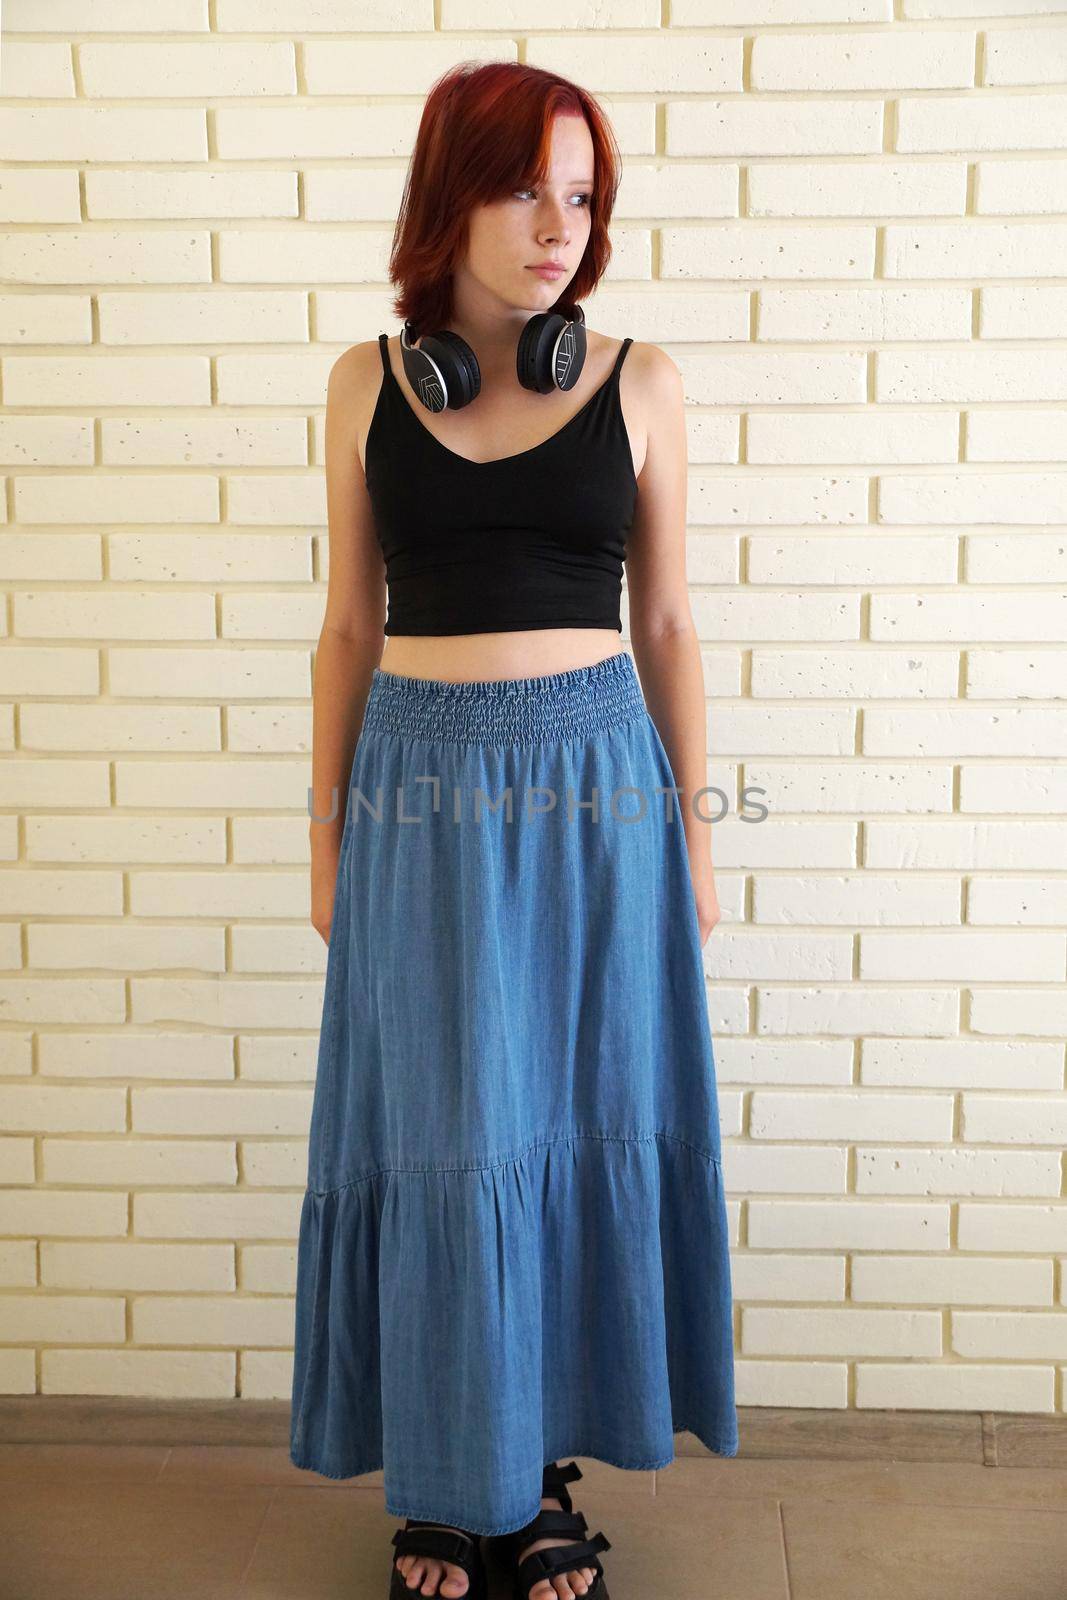 portrait of a red-haired teenage girl with headphones around her neck and in a blue long skirt against a brick wall.